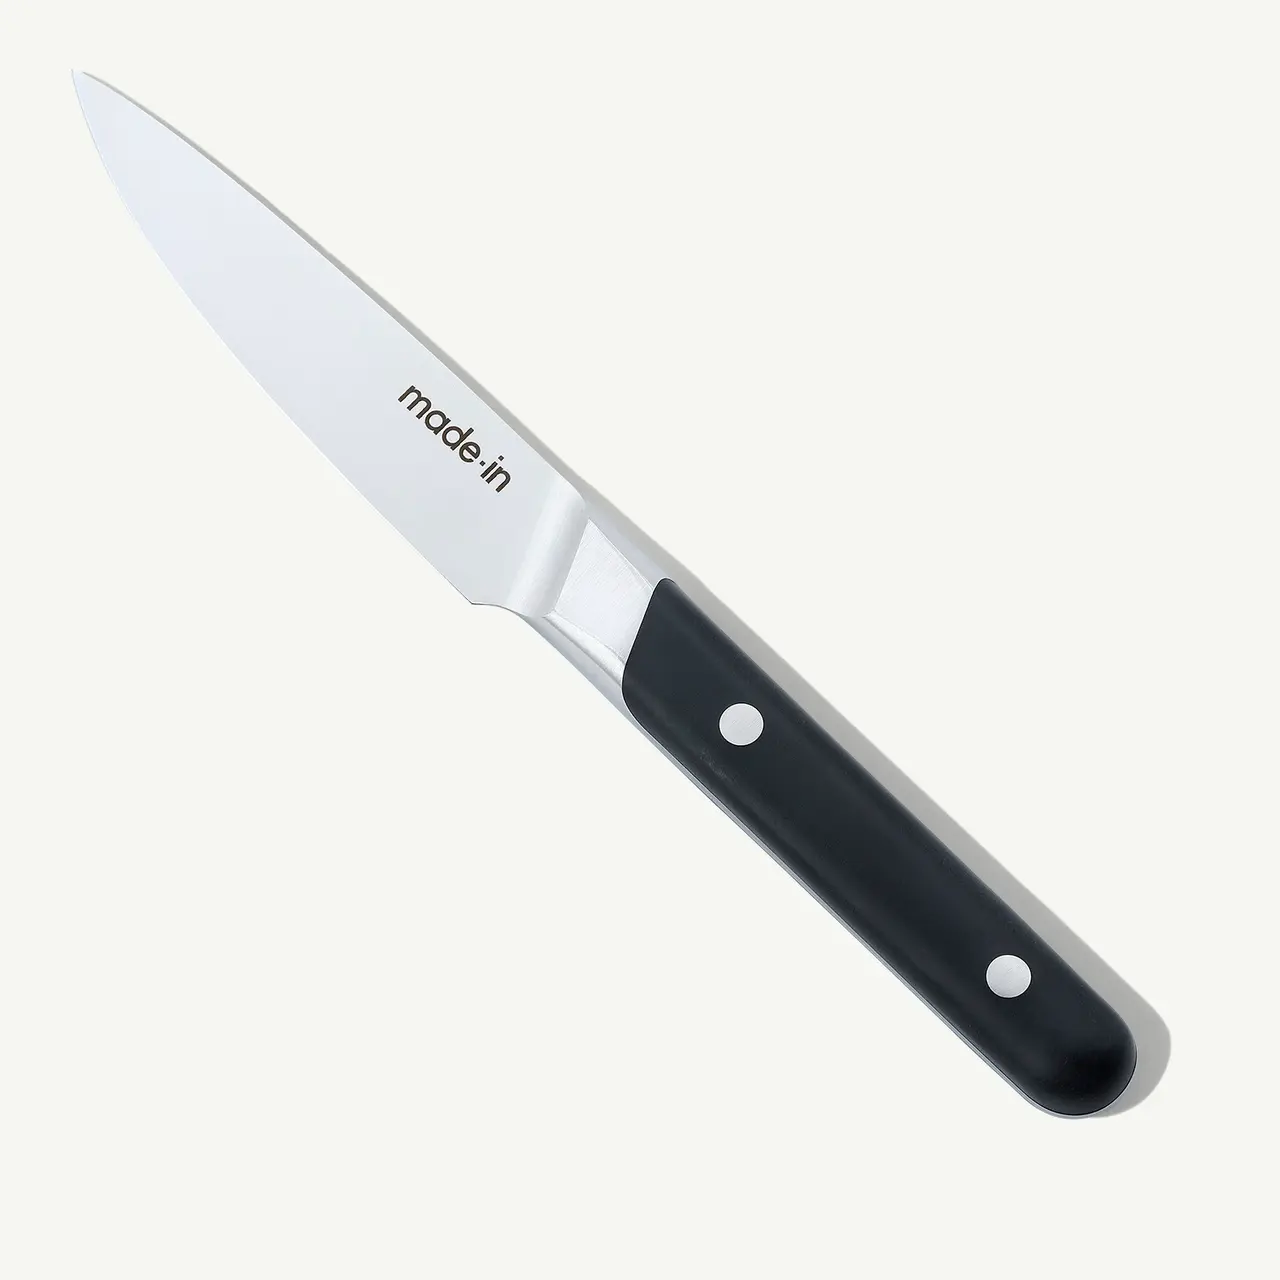 A stainless steel paring knife with a black handle is isolated against a white background.